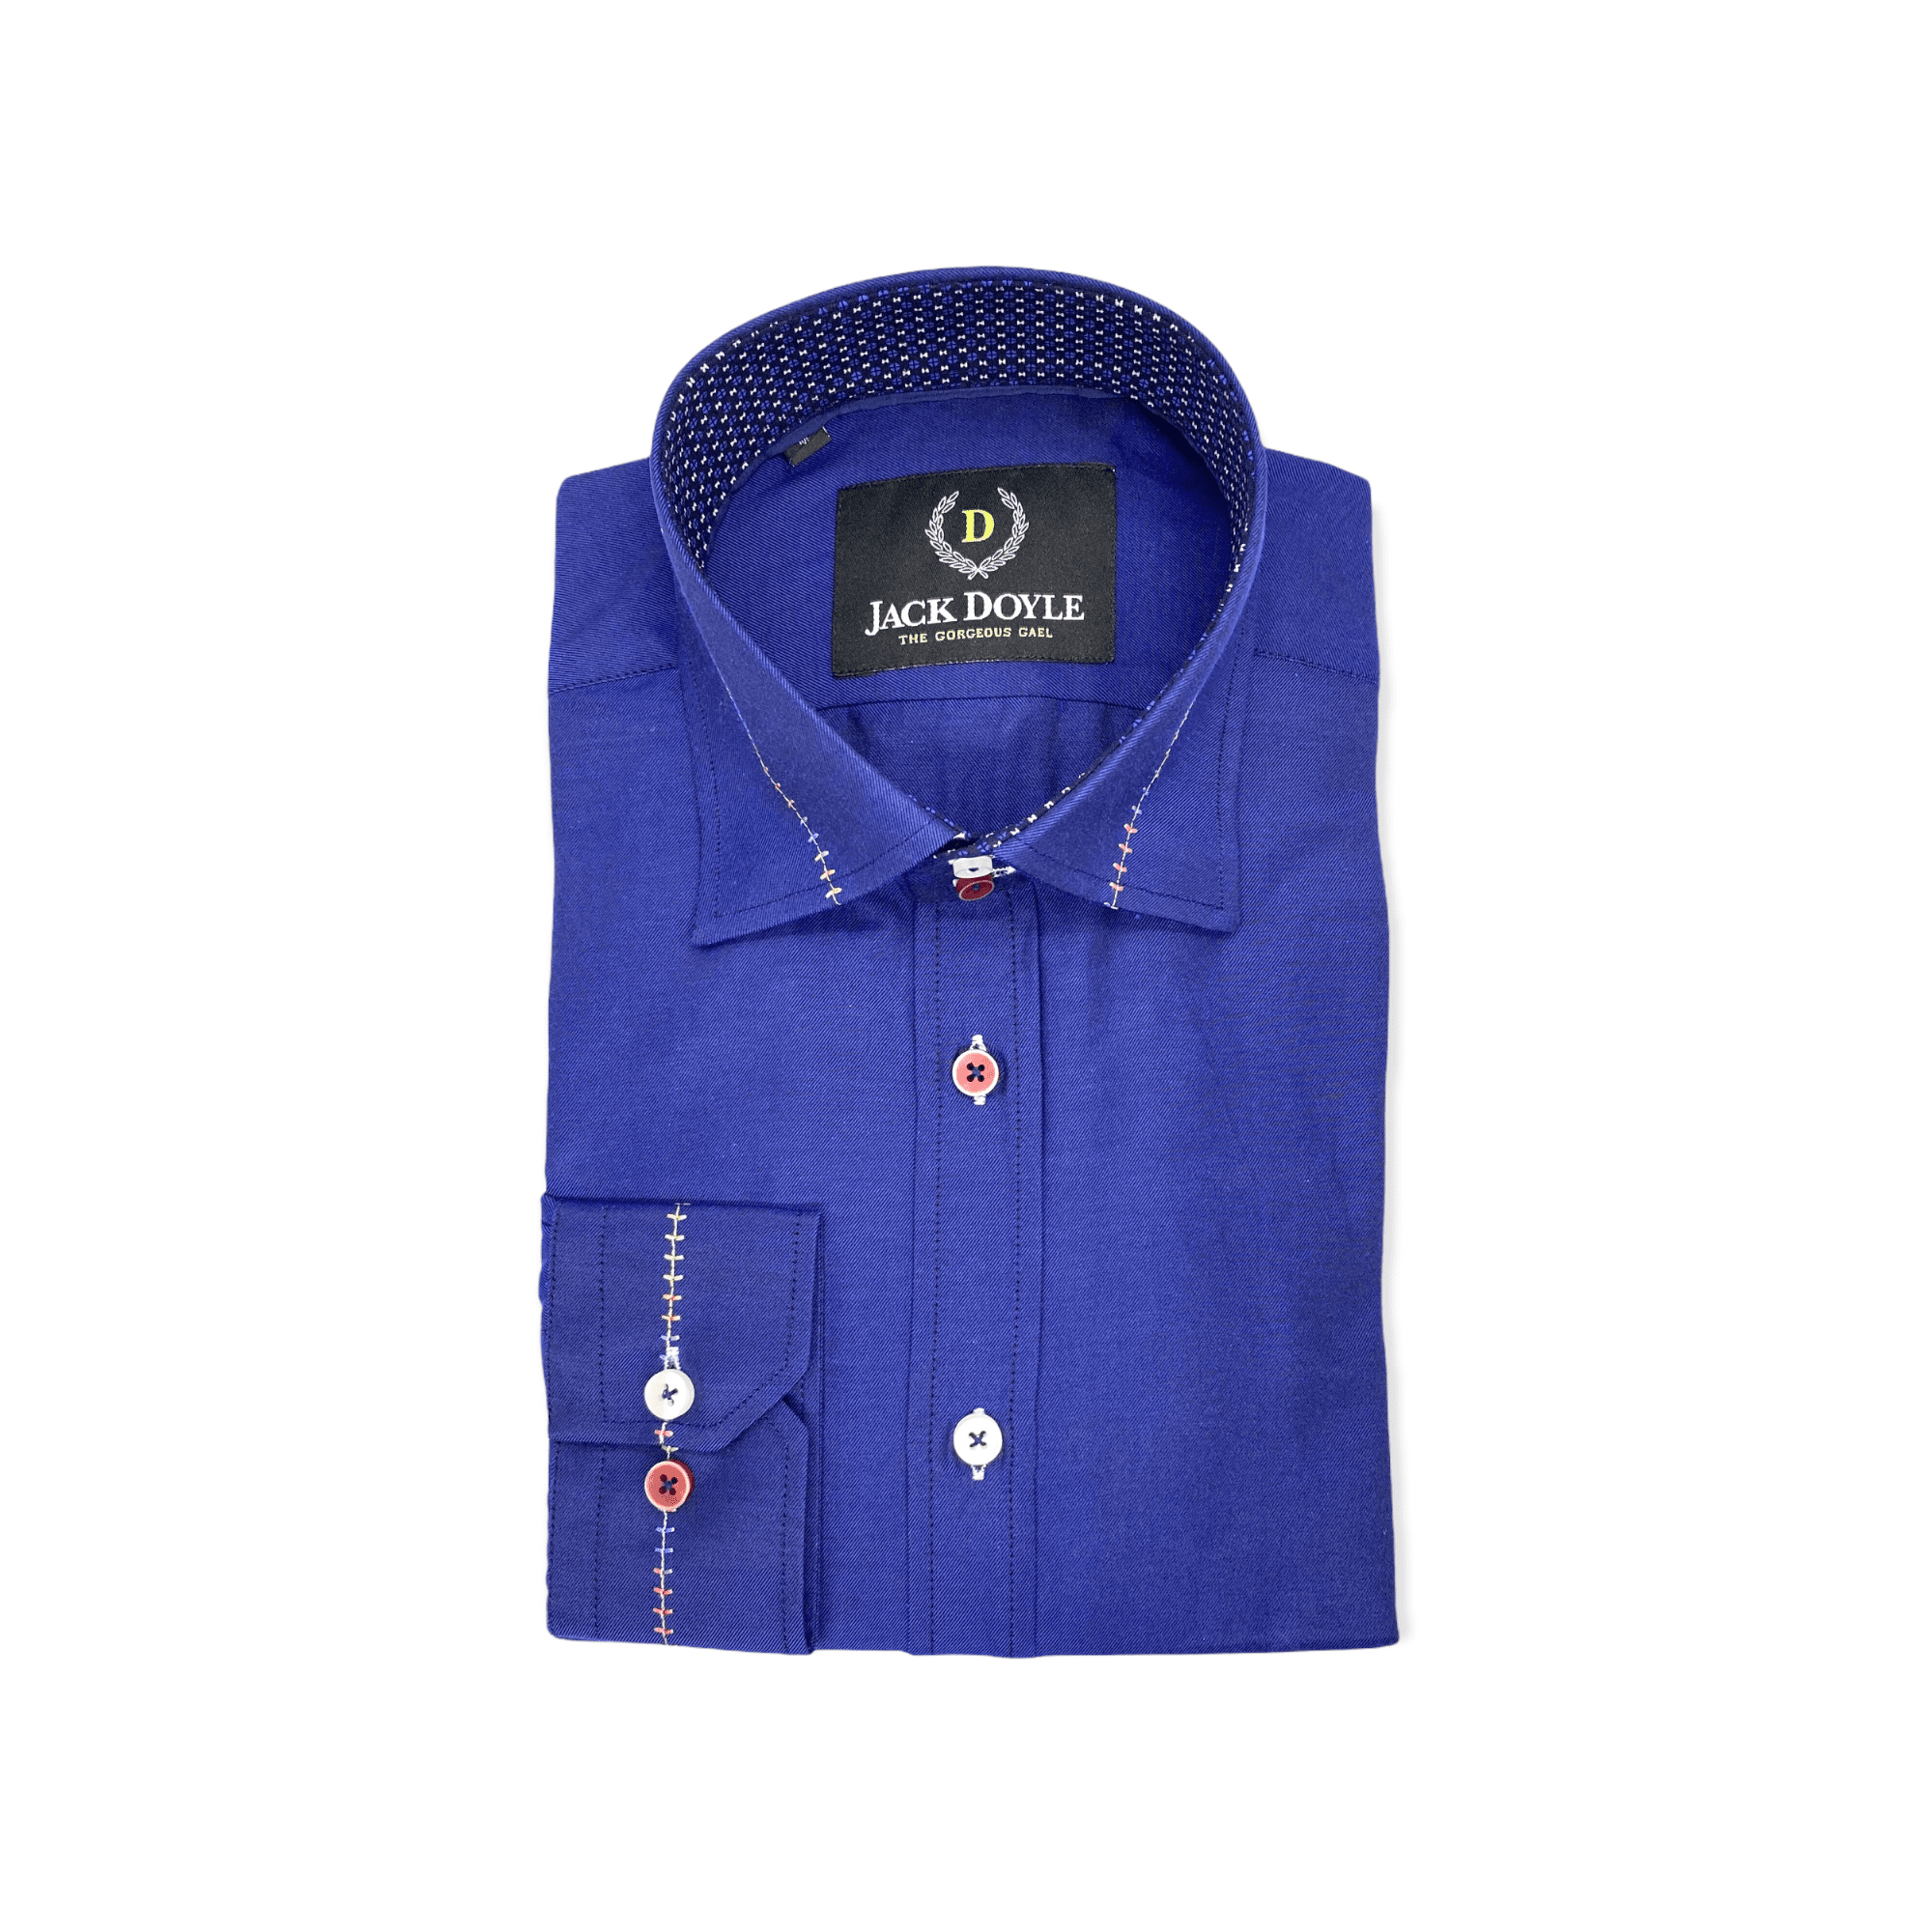 Casual Royal Blue Shirt With Trim